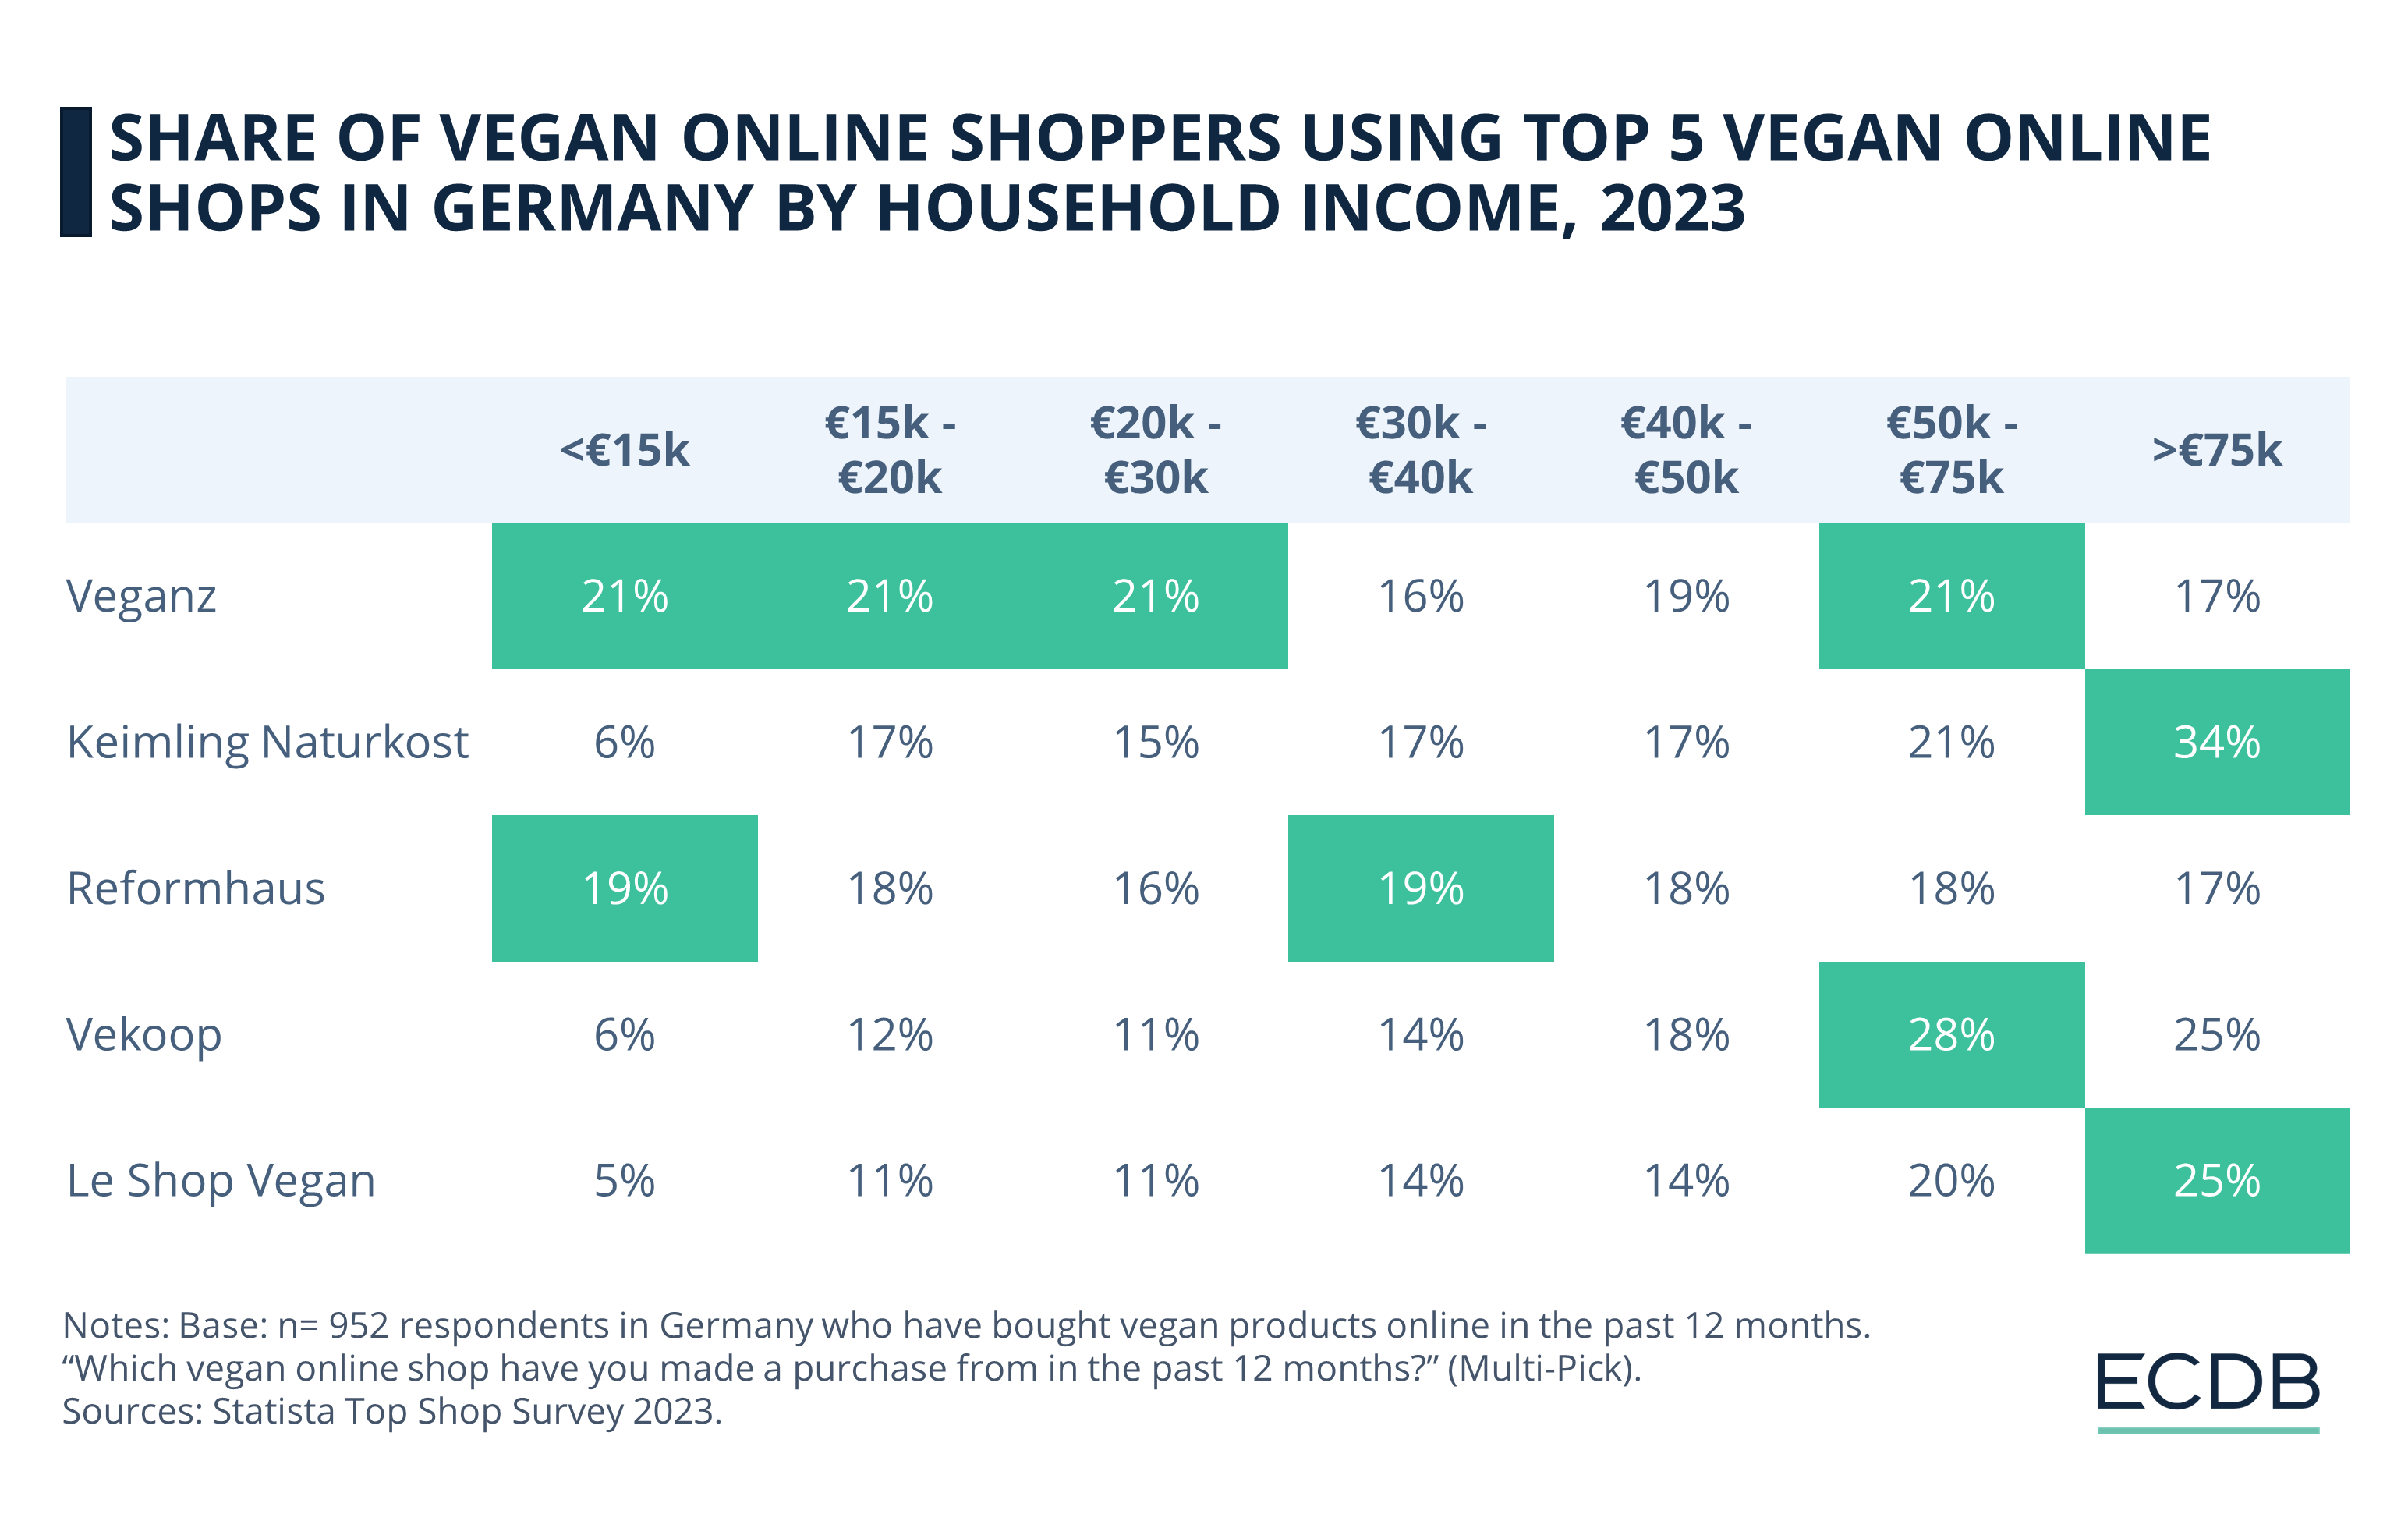 Share of Vegan Online Shoppers Using Top 5 Vegan Online Shops in Germany by Household Income, 2023